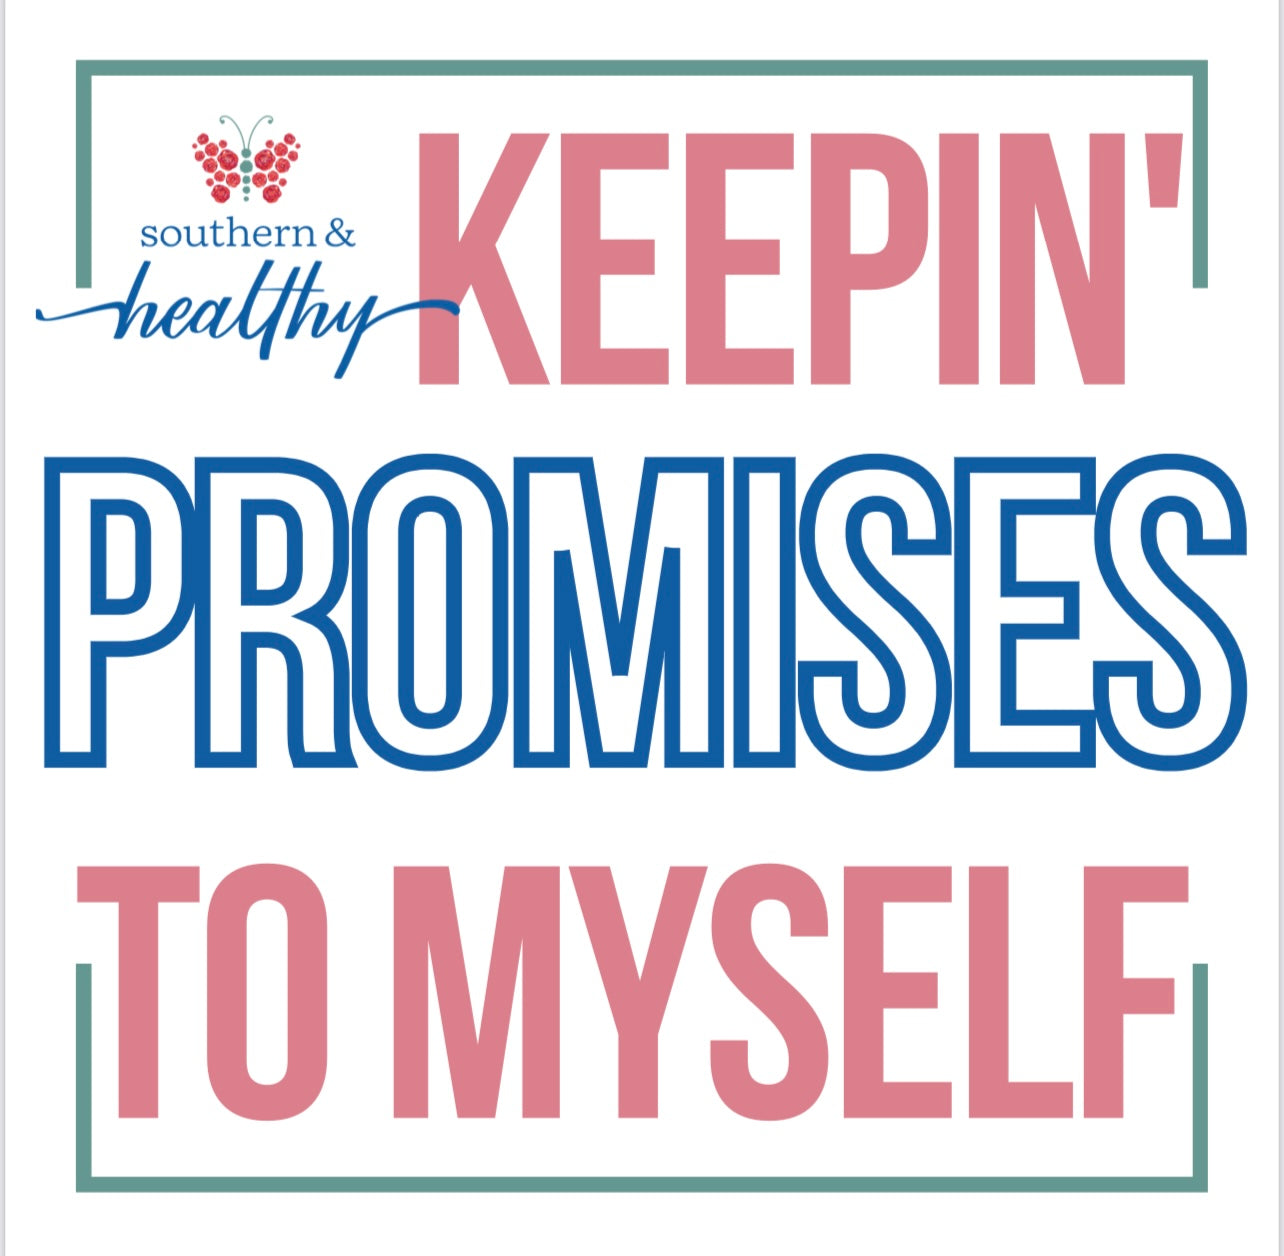 Southern & Healthy Keepin’ Promises to myself Sticker - Color